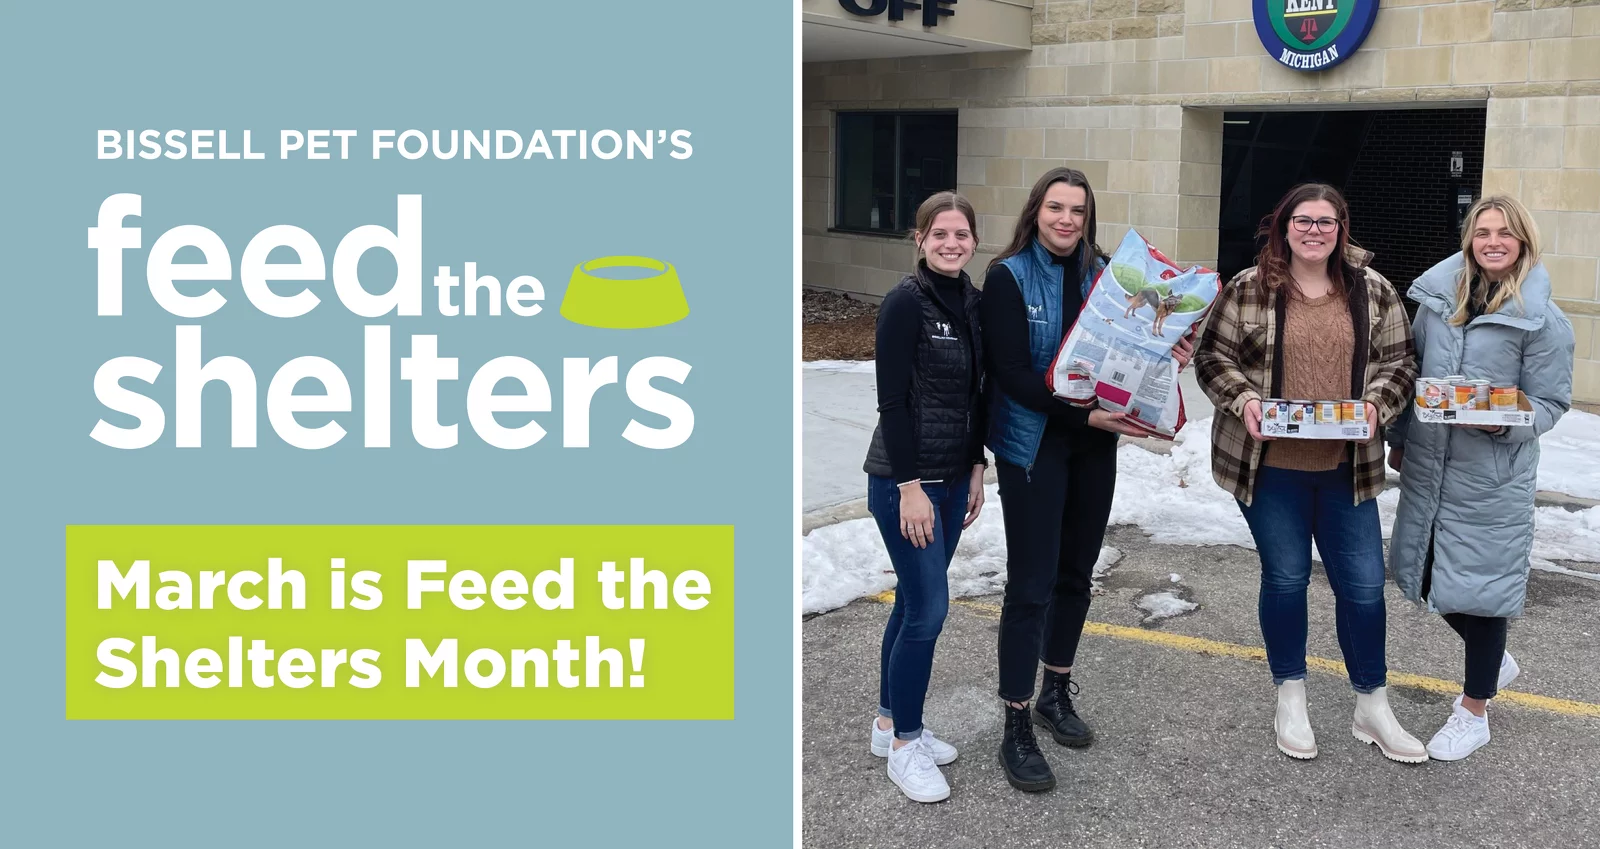 March is Feed the Shelters Month!